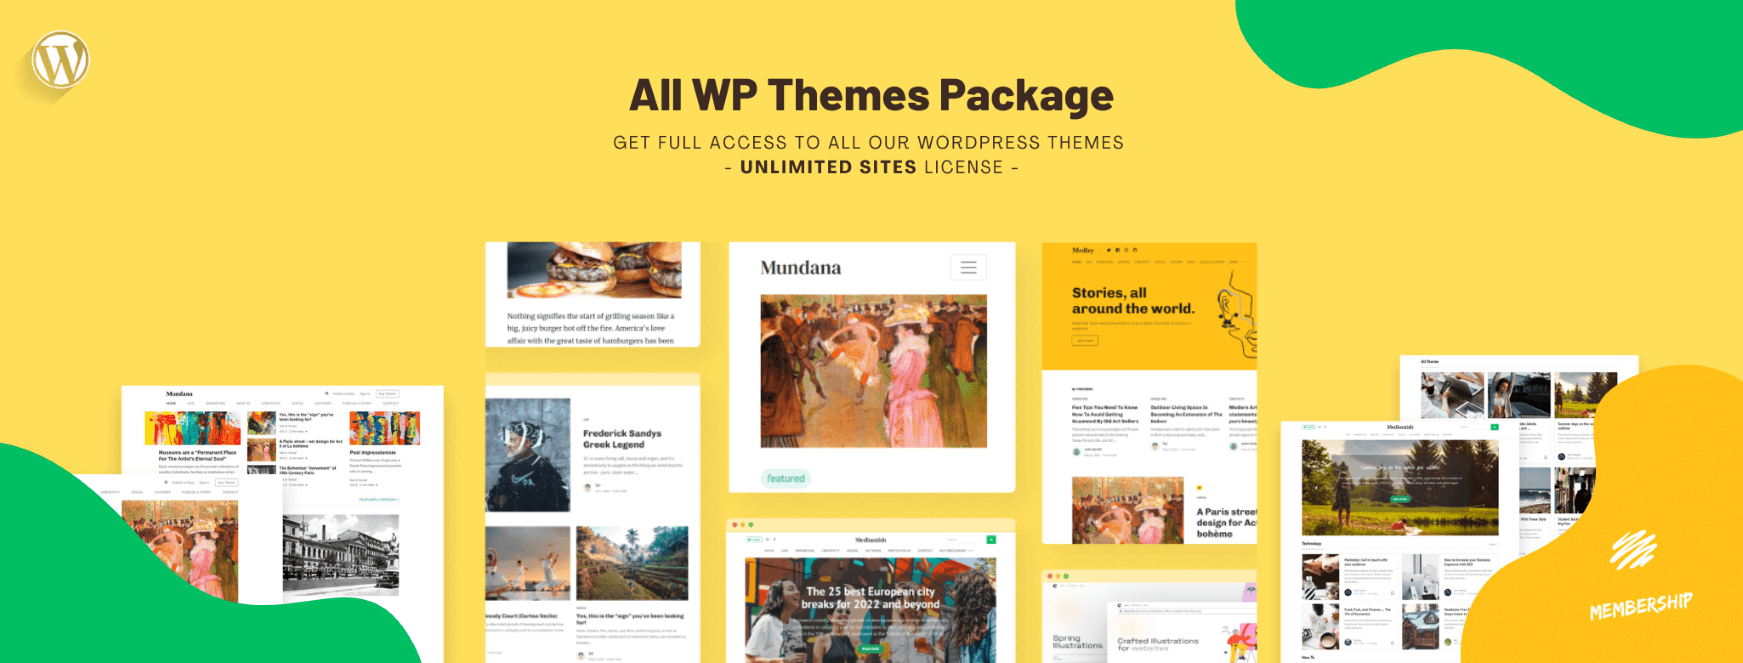 All WP Themes Package